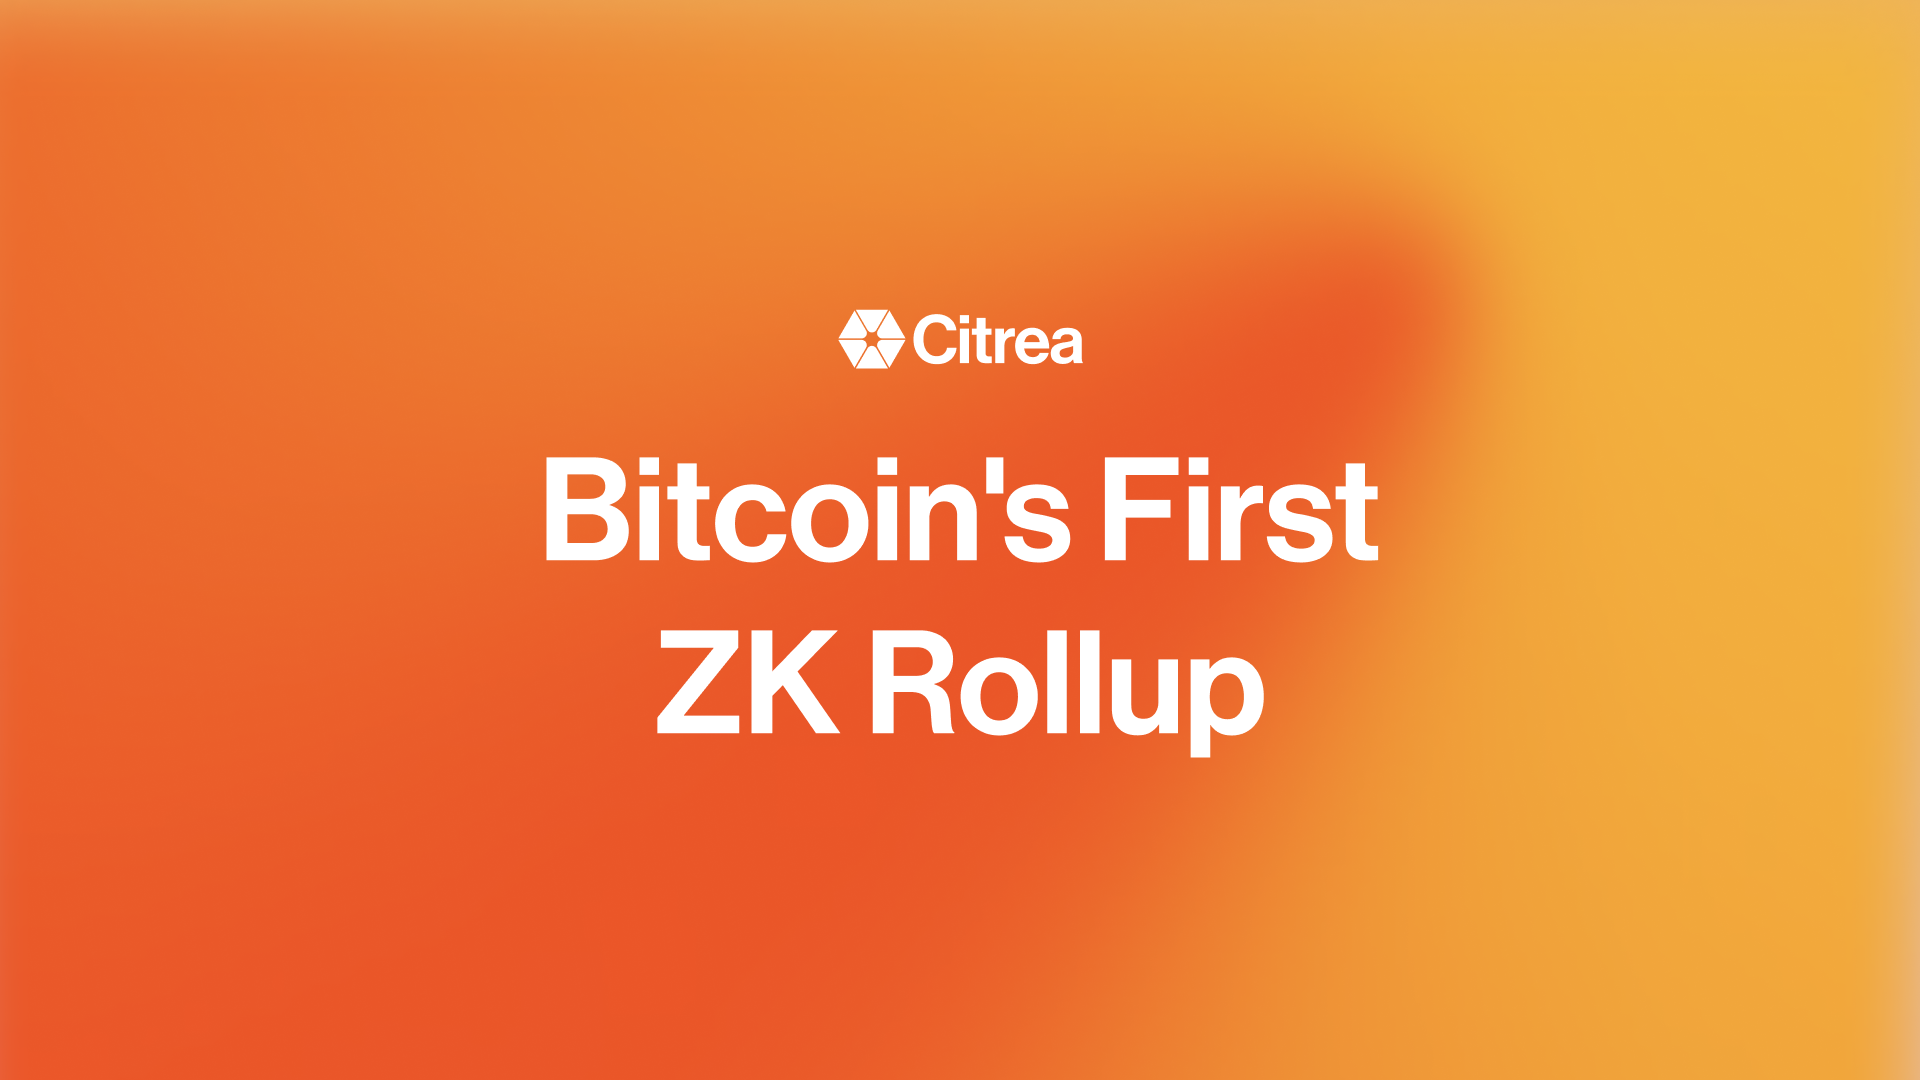 Introducing Citrea: Bitcoin’s First ZK Rollup